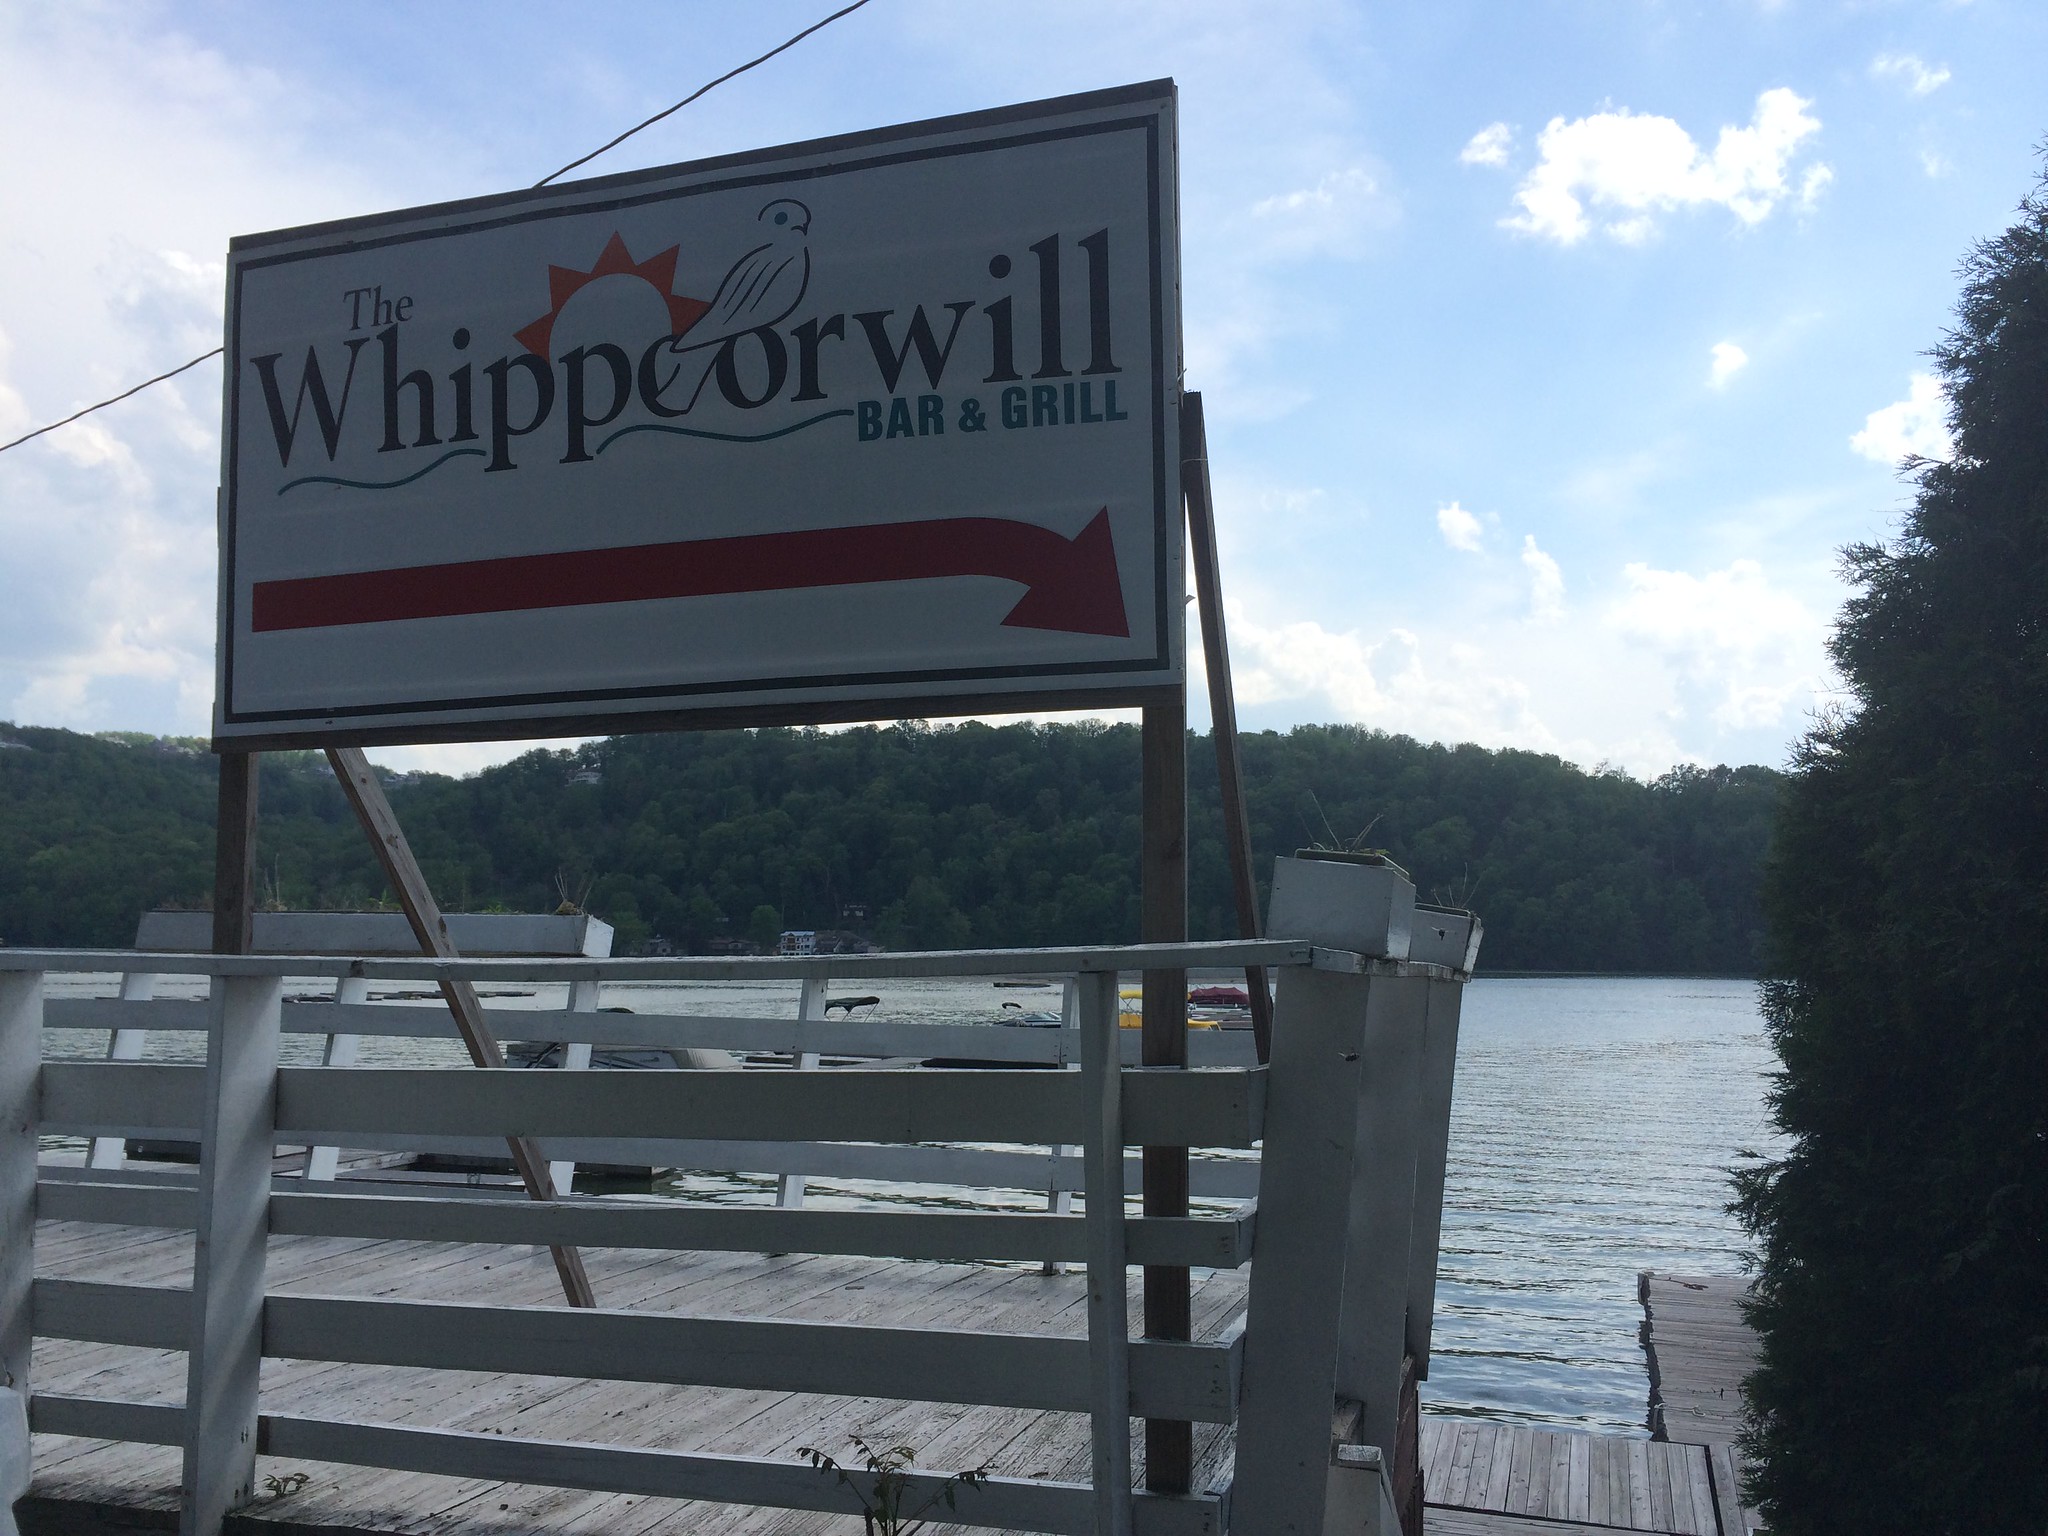 Whippoorwill Bar & Grill